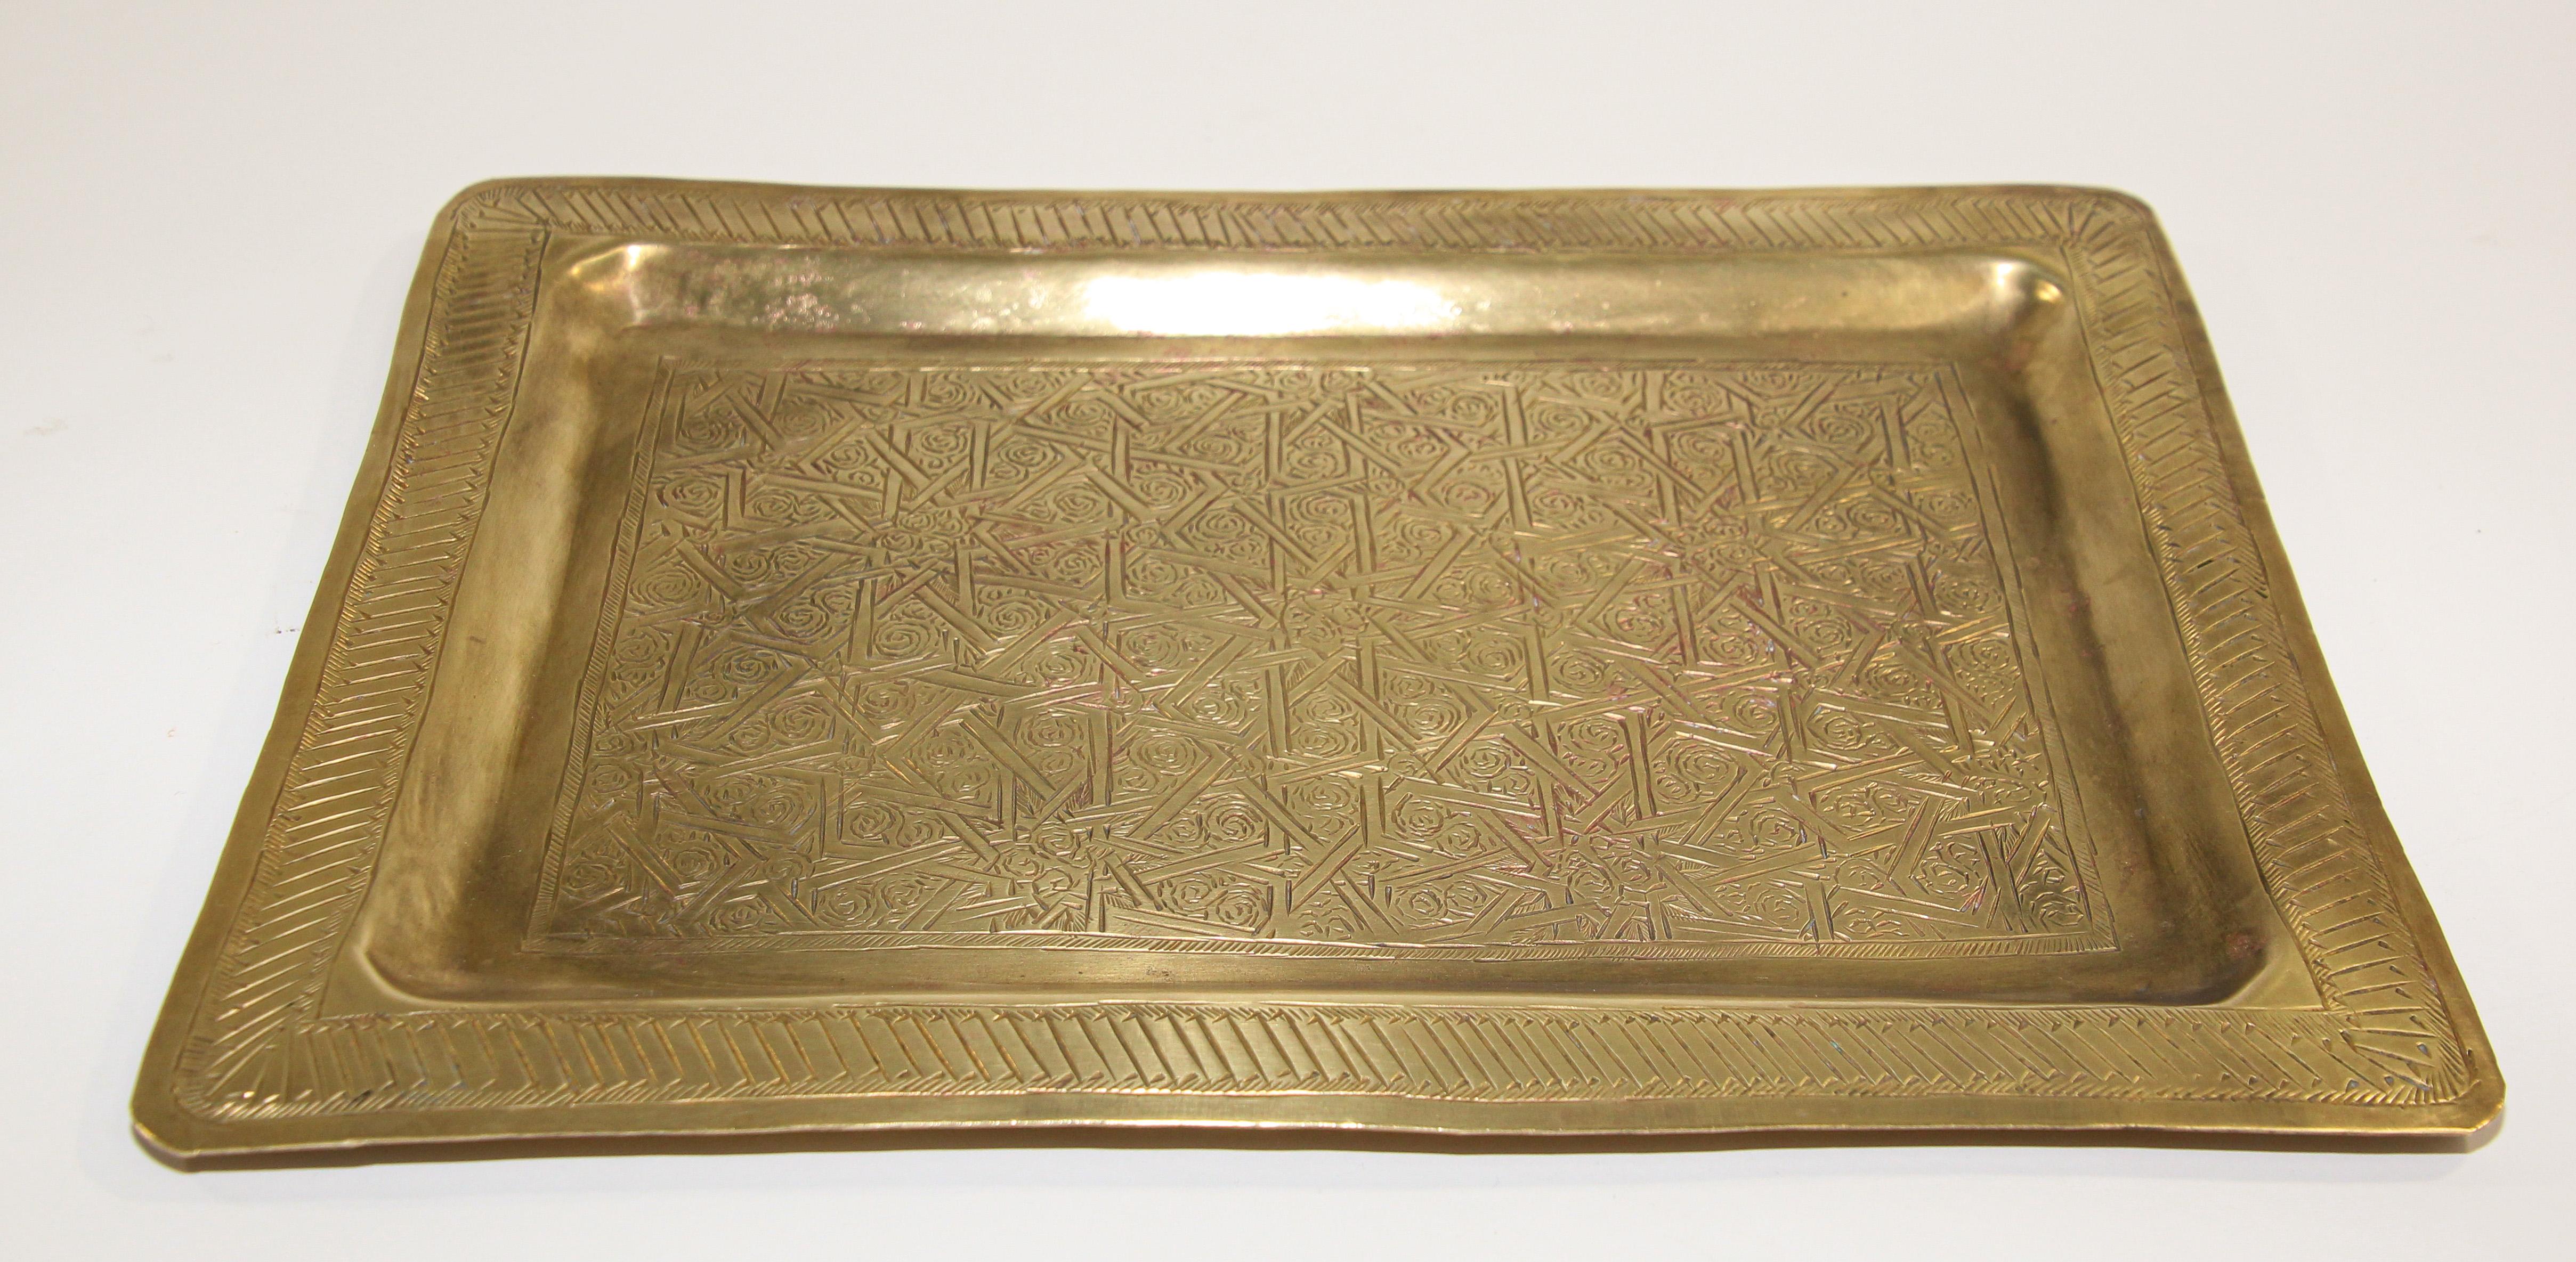 Moroccan Moorish rectangular brass tray with fine delicate geometrical designs.
Could be used as a serving tray, or decorative wall hanging.
Fine handcrafted hammered and chased Moorish star designs.
Hand made in Morocco, circa 1940's.